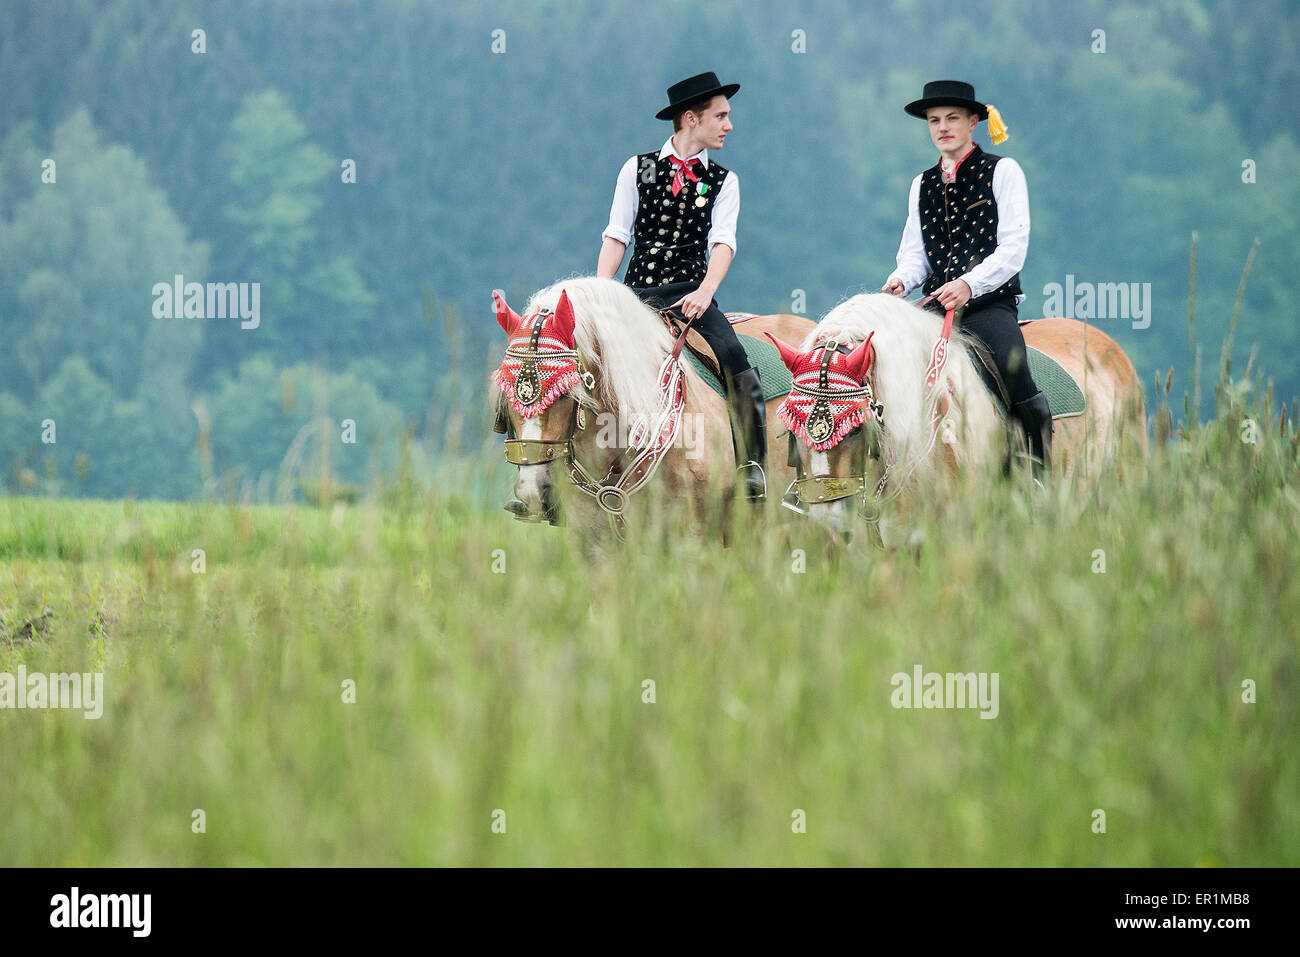 Bad Koetzting, Germany. 25th May, 2015. Participants of the Pentecost Ride ride on their horses near Bad Koetzting, Germany, 25 May 2015. The procession with some 900 riders is one of the oldest Bavarian traditional events. The men pilgrim on their beautifully decorated horses from Bad Koetzting to the Nikolaus church in Steinbuehl on a distance of seven kilometres. Photo: ARMIN WEIGEL/dpa/Alamy Live News Stock Photo